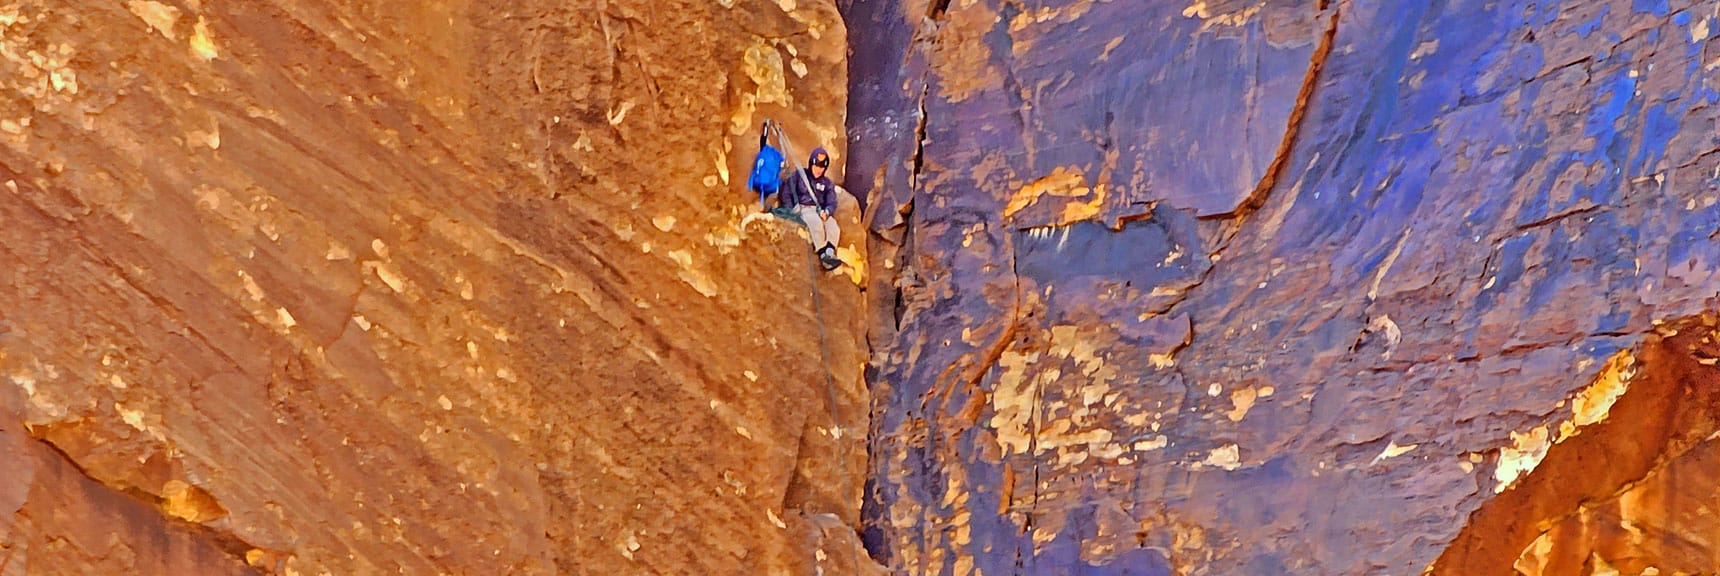 Another High Ledge Offers a Resting Point for Lead Climber. | Rock Climber Observations | Pine Creek Canyon | Rainbow Mountain Wilderness, Nevada